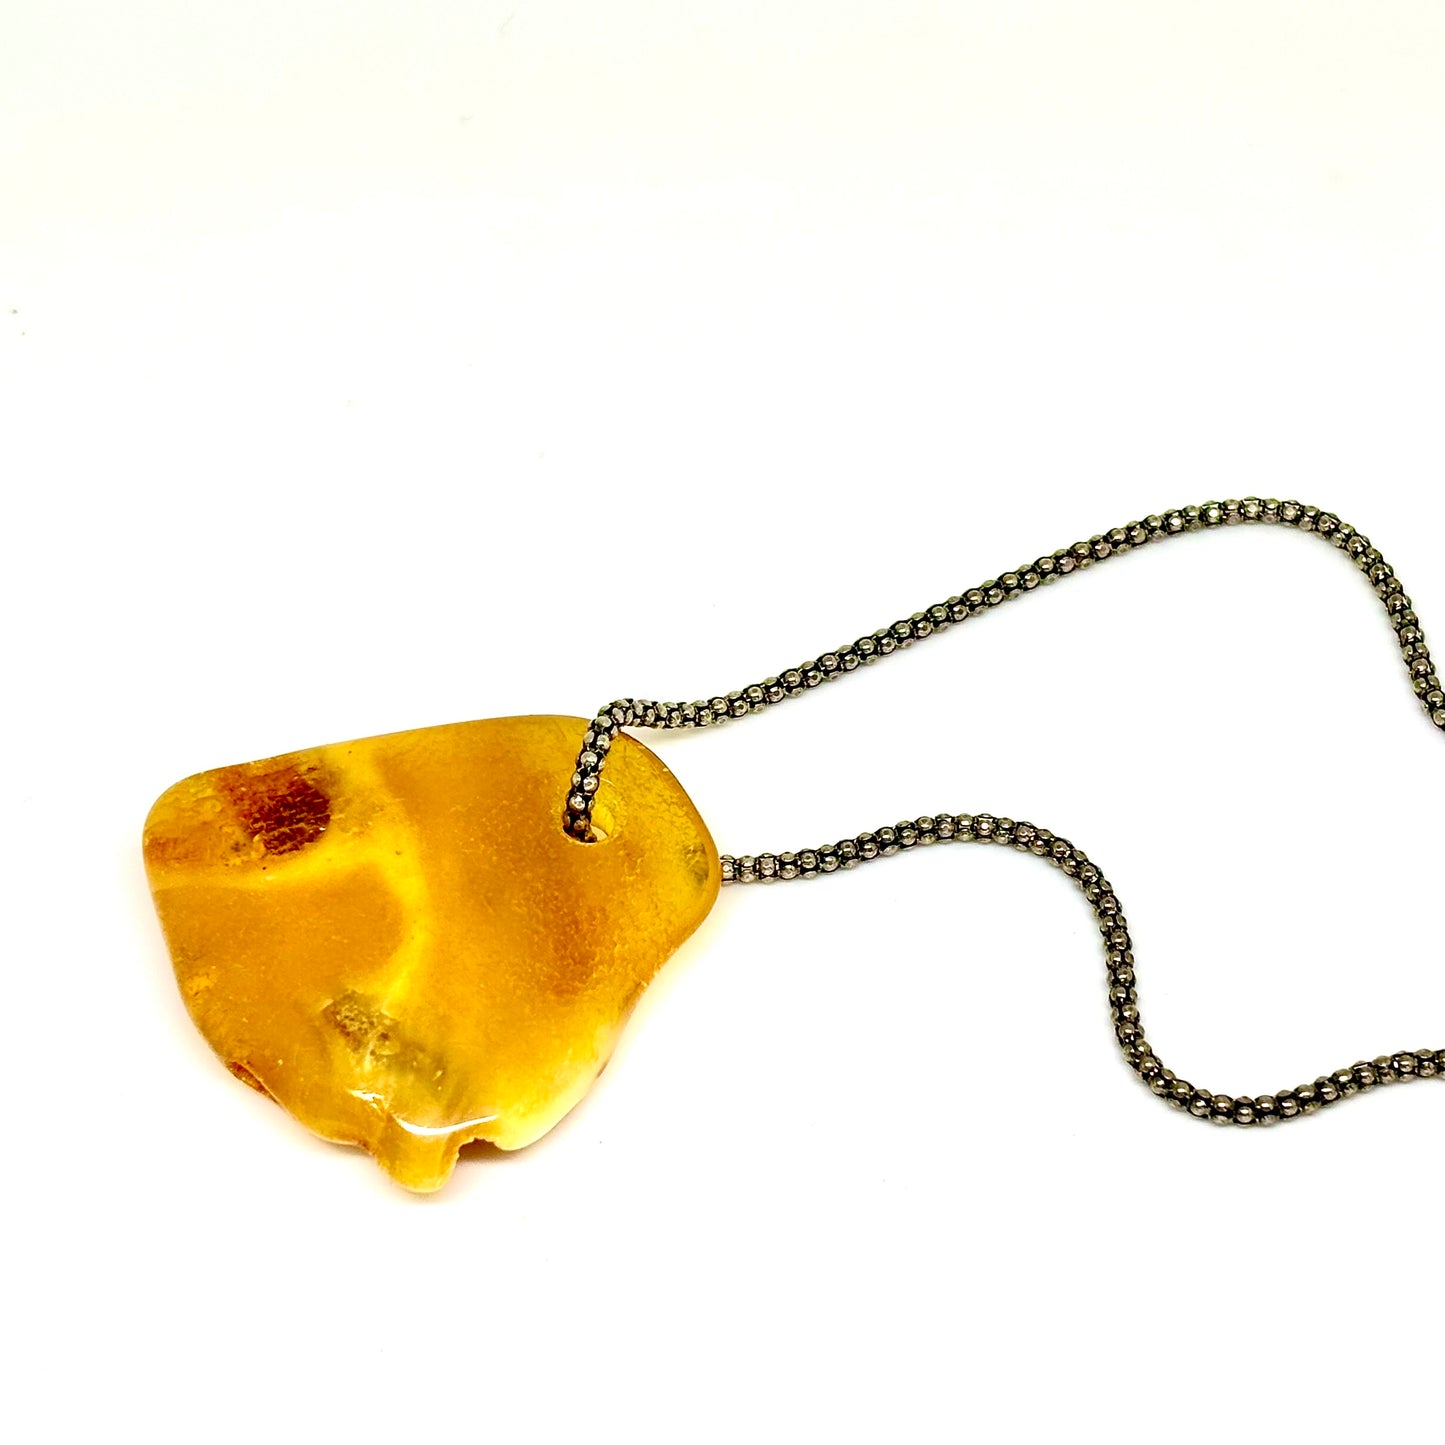 Butterscotch Baltic Amber One of a Kind Men's Necklace